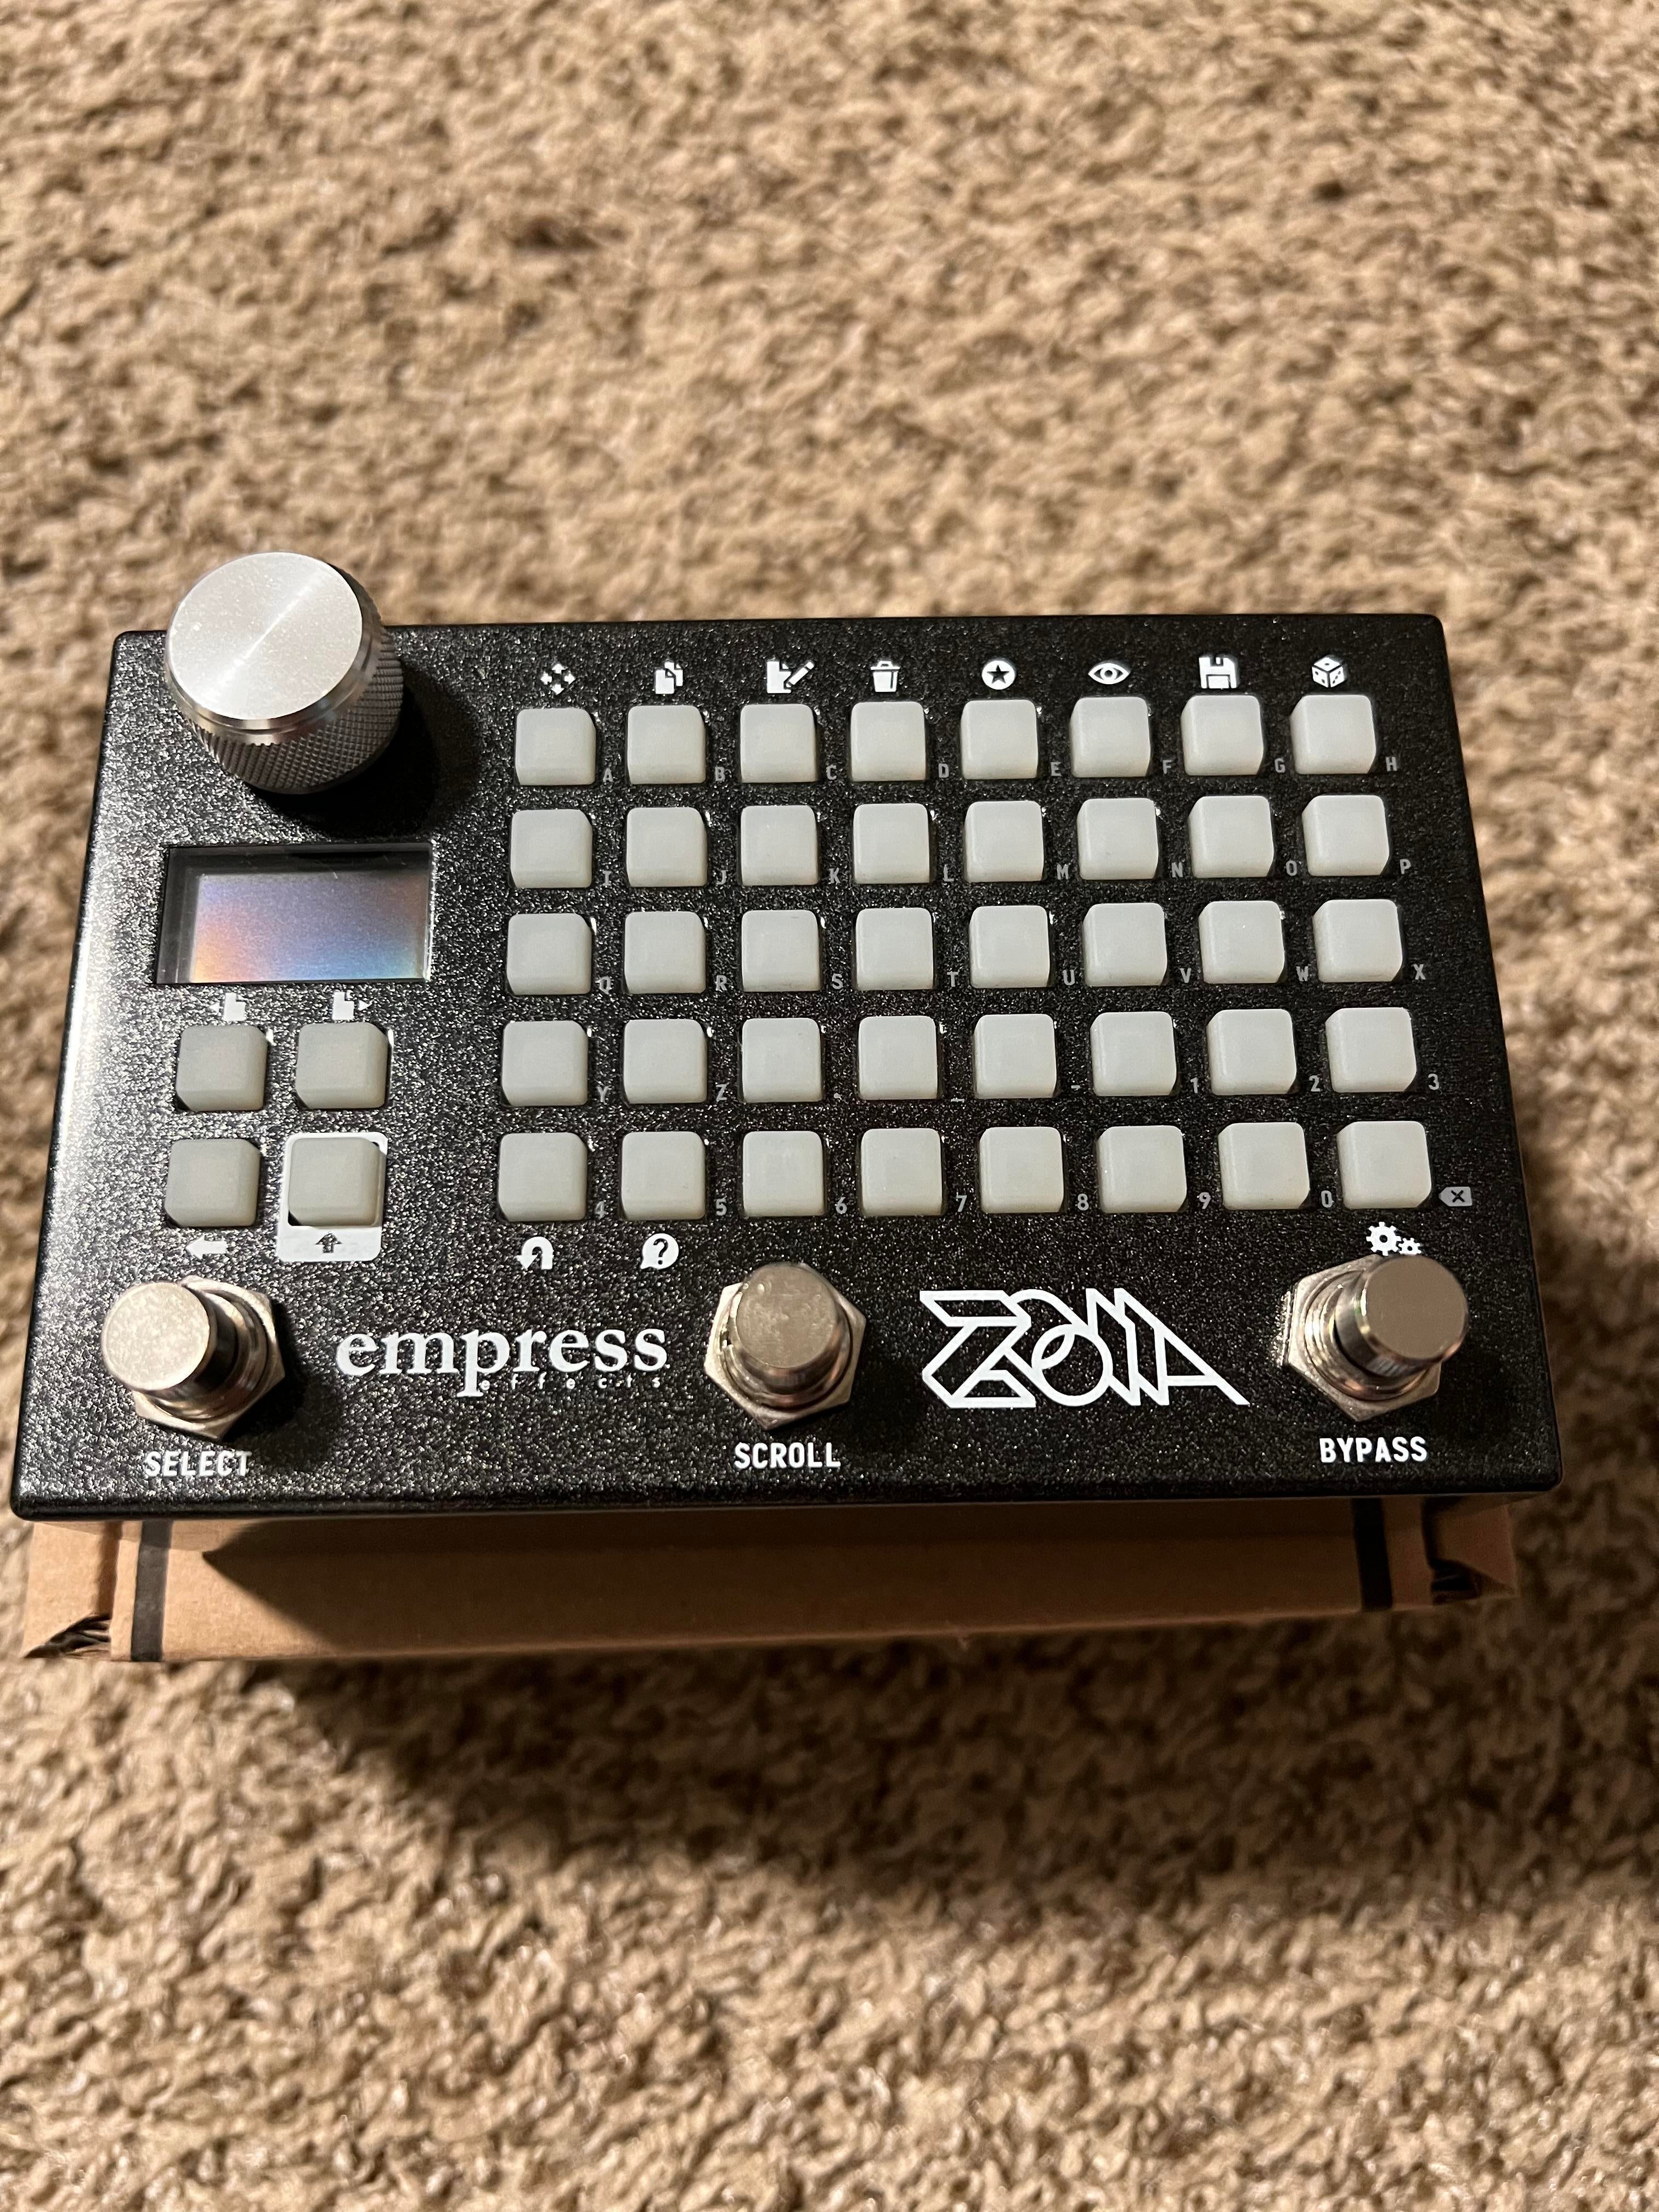 Used Empress ZOIA Modular Synthesizer Pedal | Sweetwater Gear Exchange